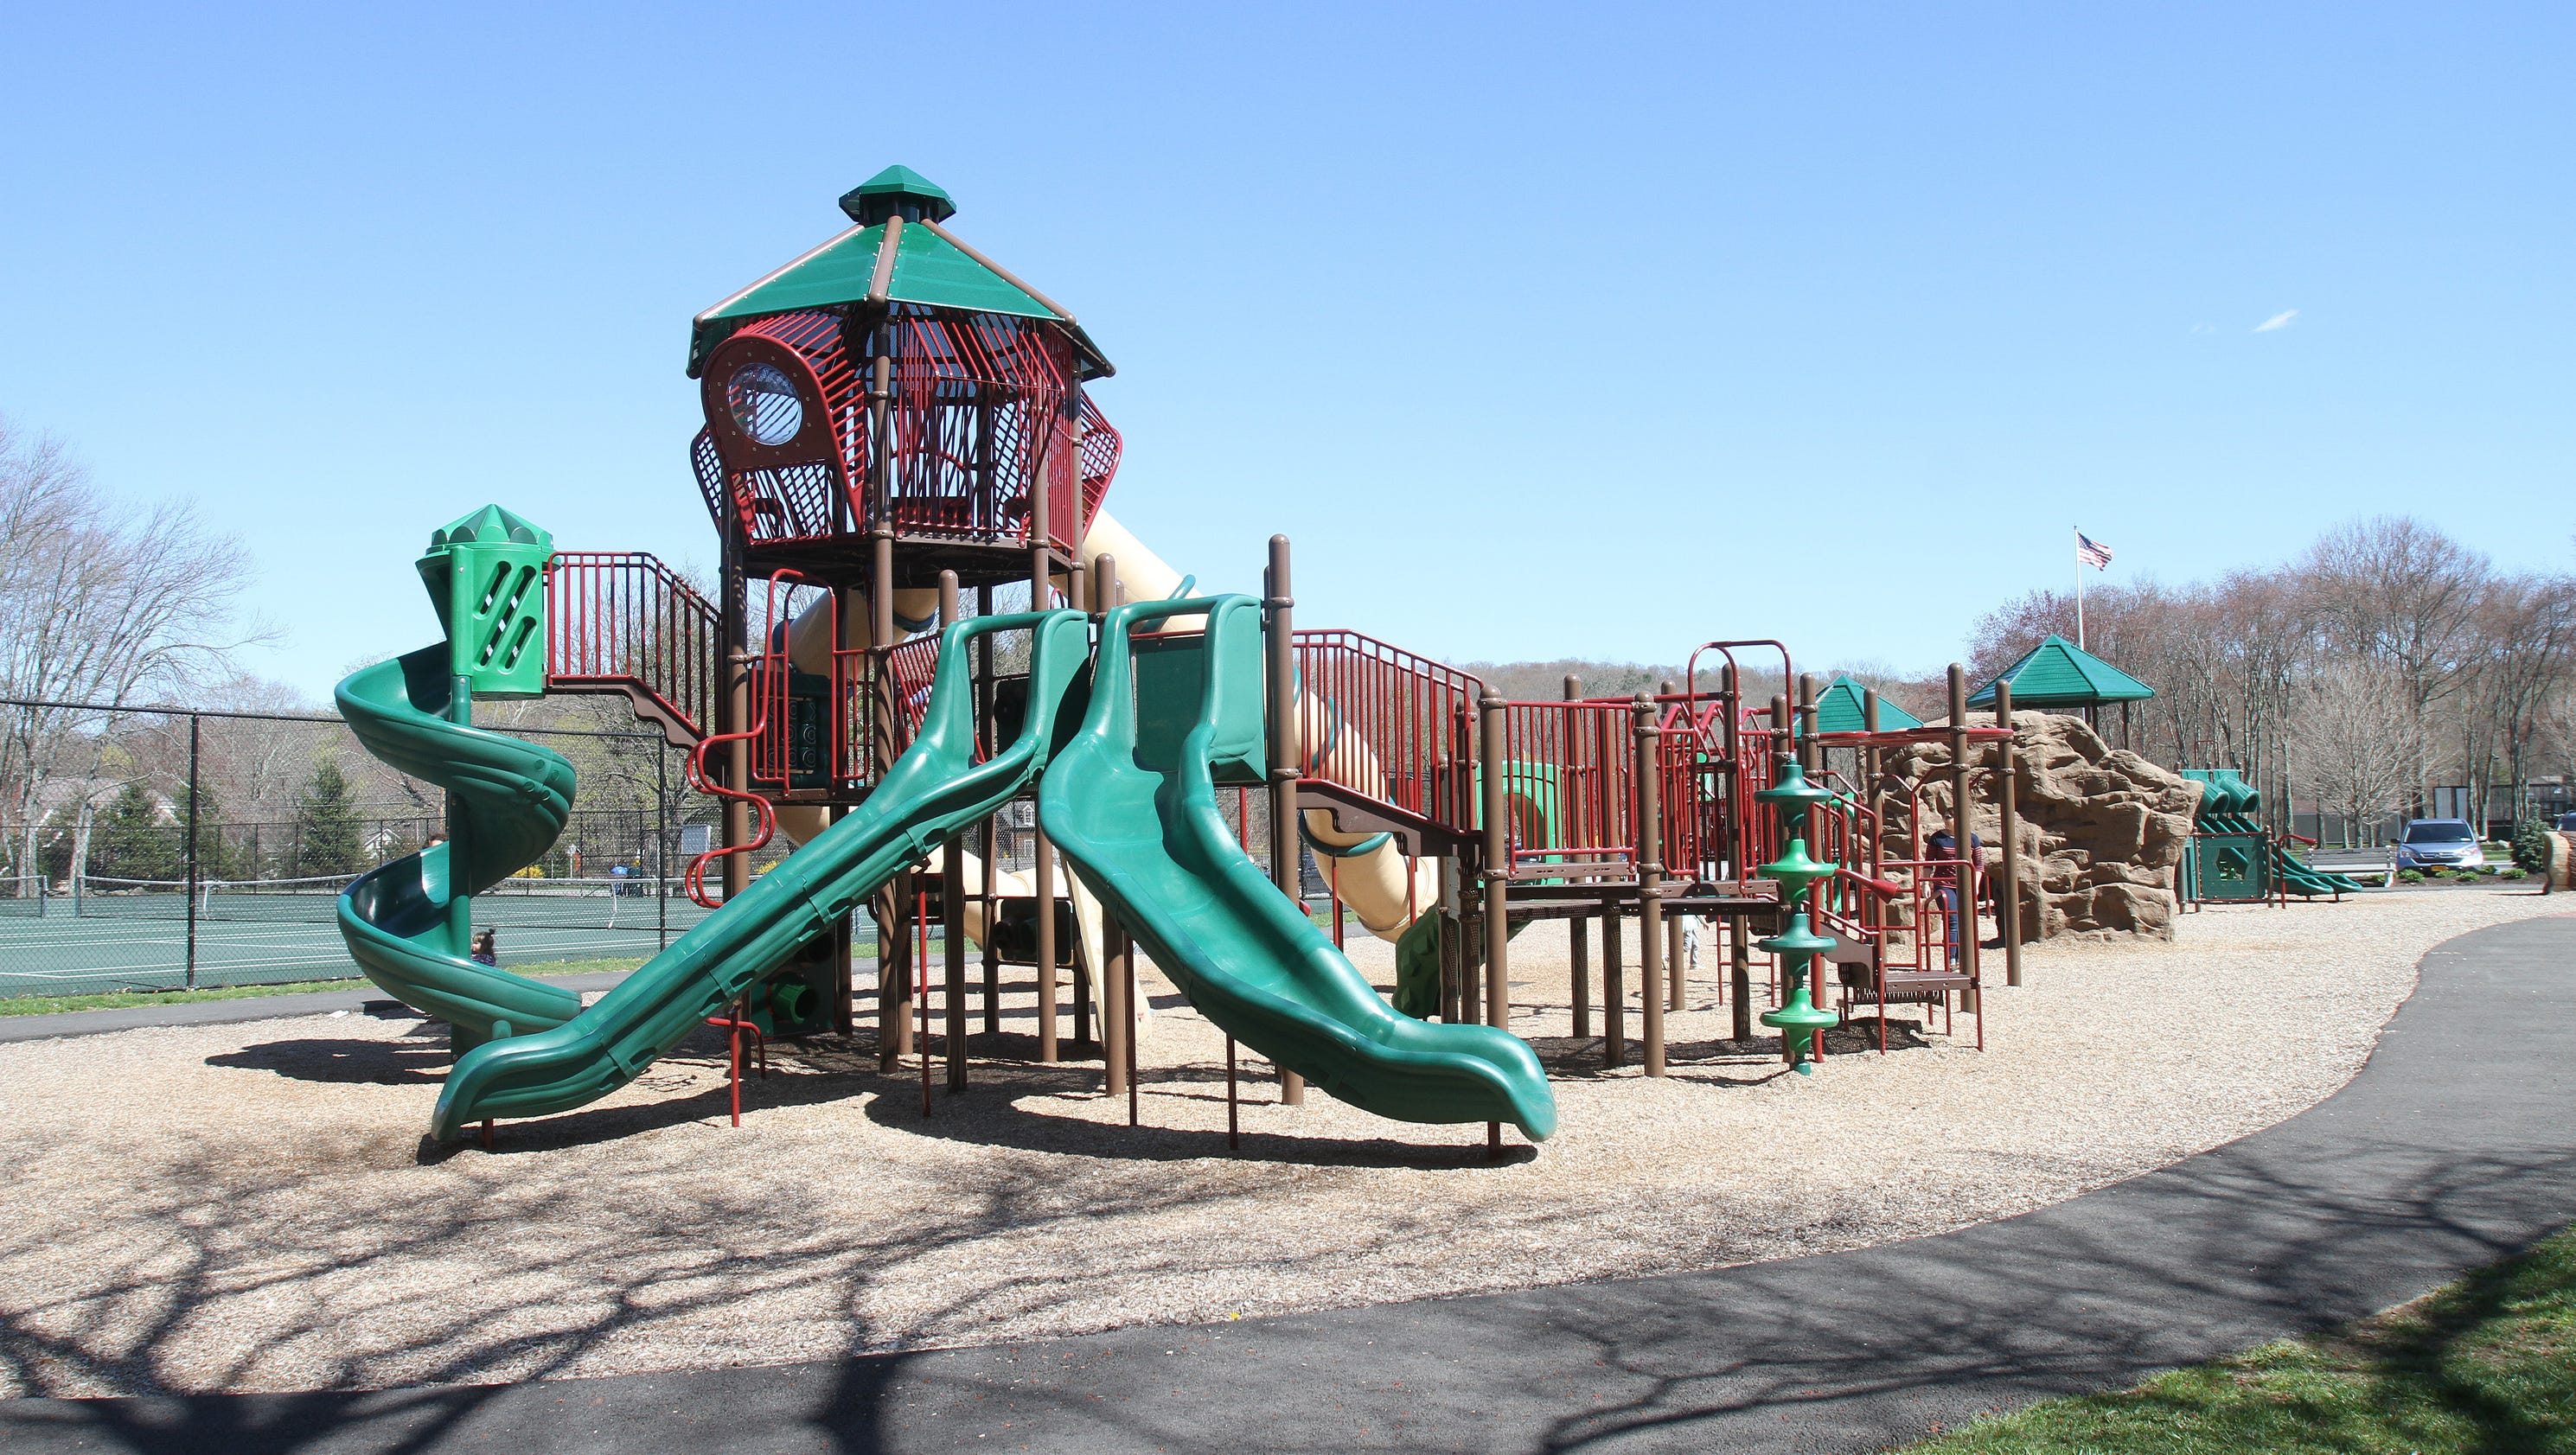 Visit these kid-friendly parks